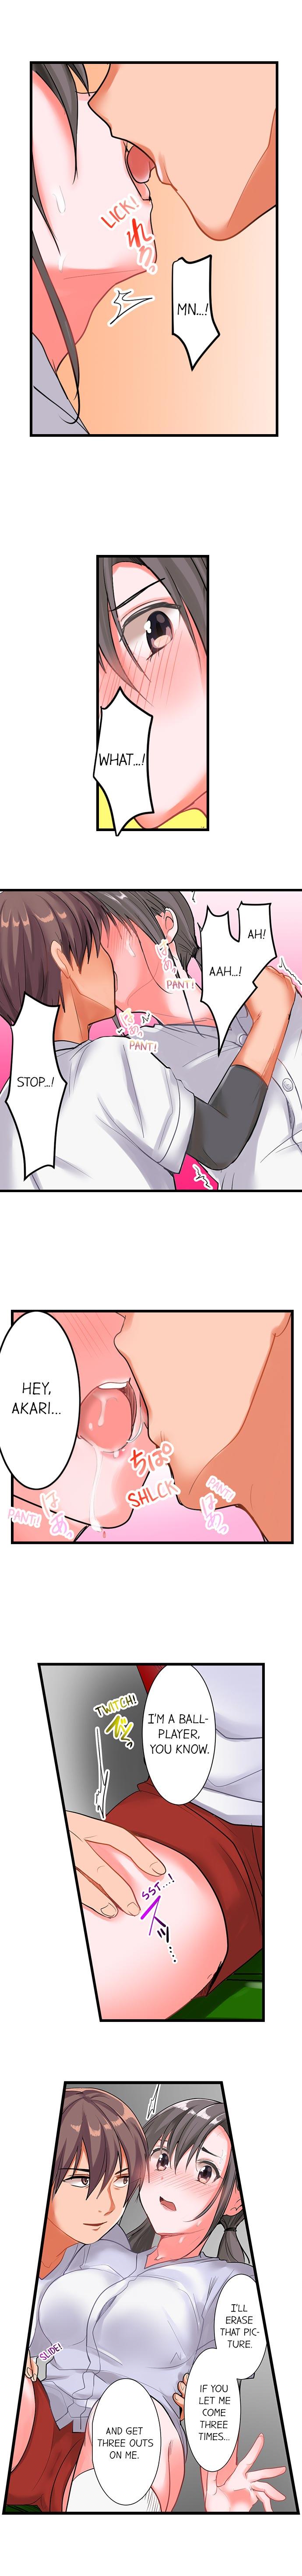 The Day She Became a Sex Toy (Complete] 12